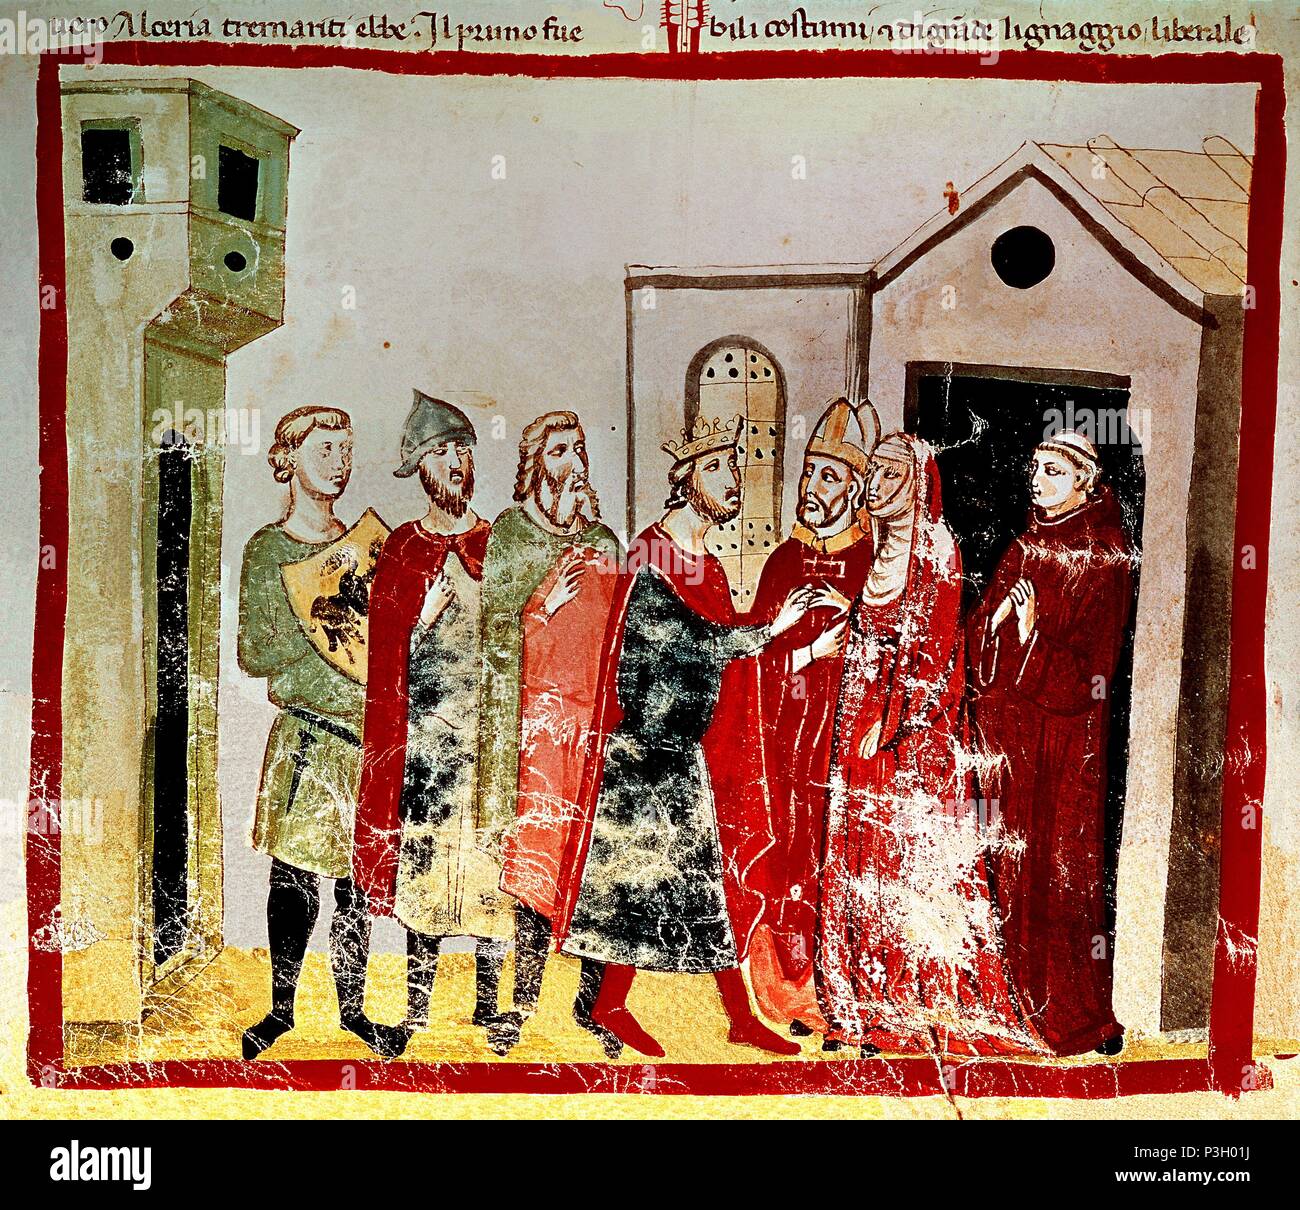 Gregory VII (Gregorio VII), pope from 1073 to 1085. Library of the Vatican. Chronicle . Audience in Canossa in 1077 - Henry IV of Germany asking for Pope Gregory VII and Matilda's forgiveness. Author: VILLANI GIOVANNI. Location: BIBLIOTECA APOSTOLICA-COLECCION, VATICANO. Stock Photo